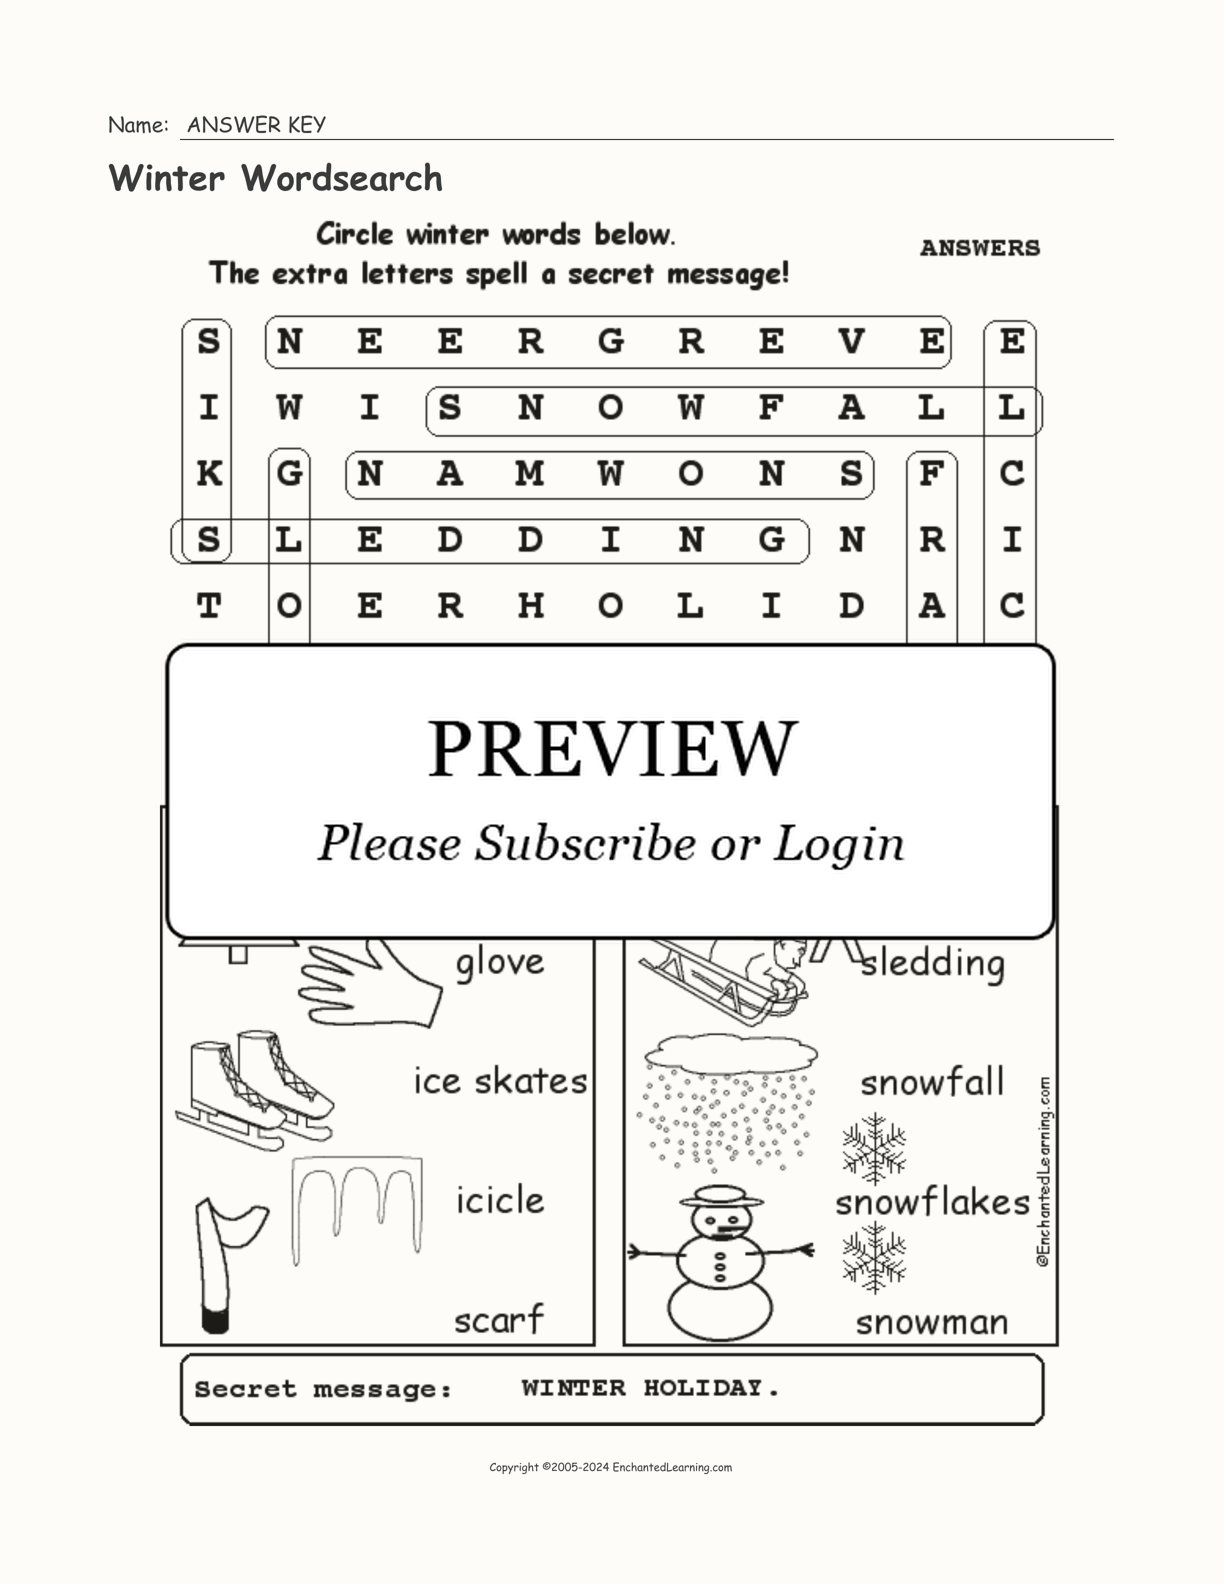 Winter Wordsearch interactive worksheet page 2